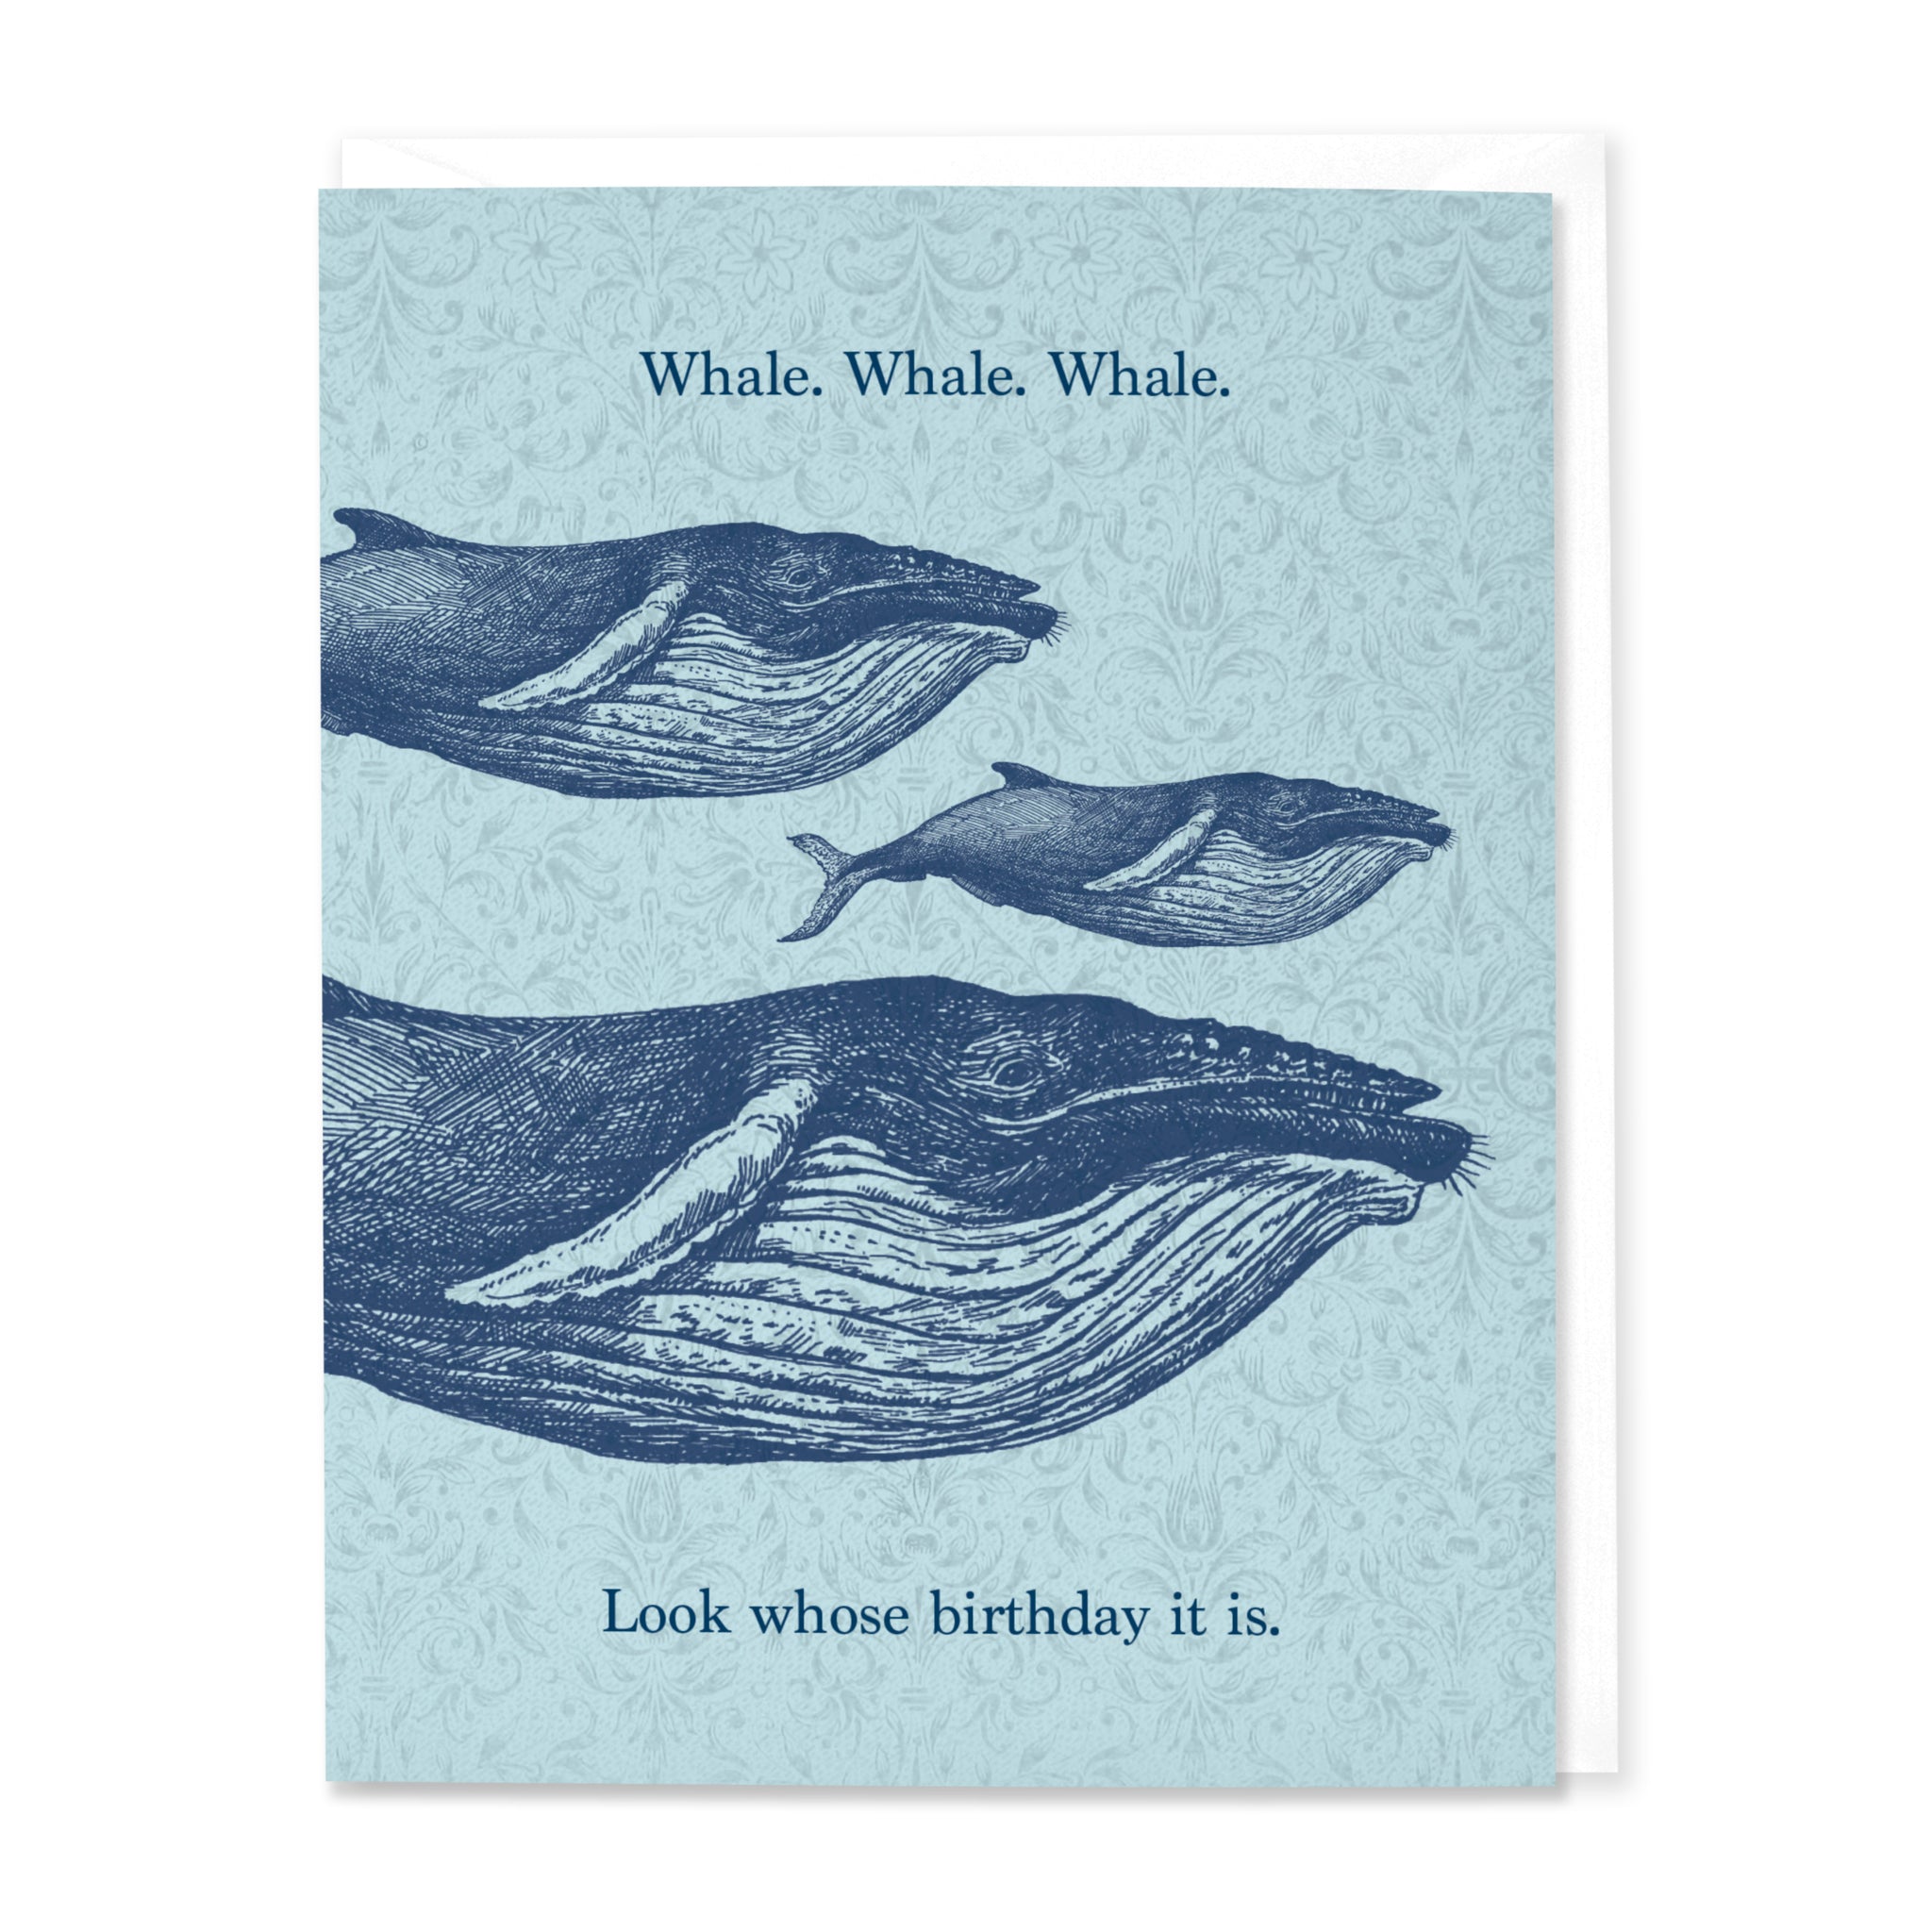 Whale. Whale. Whale. Birthday (Set of 8)